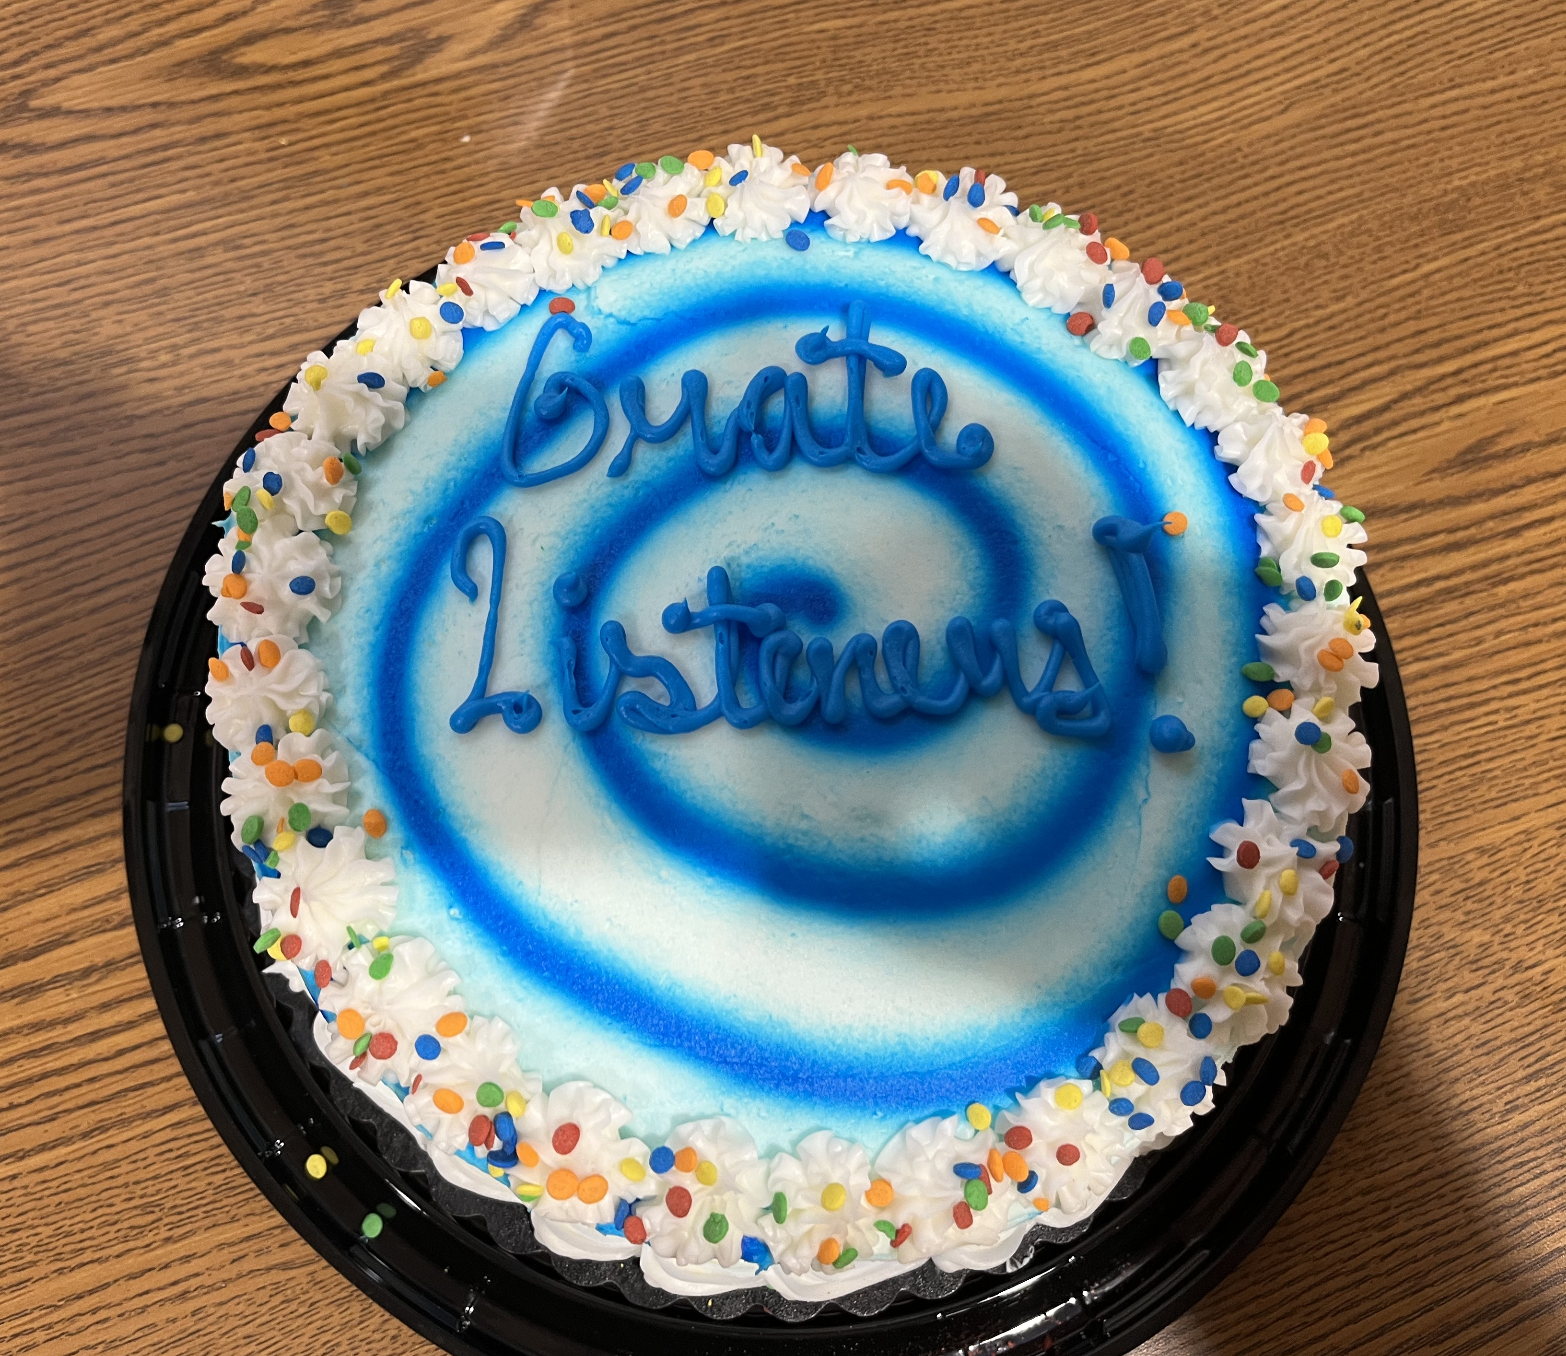 Cake decorated with the words "Grate Listeners!"